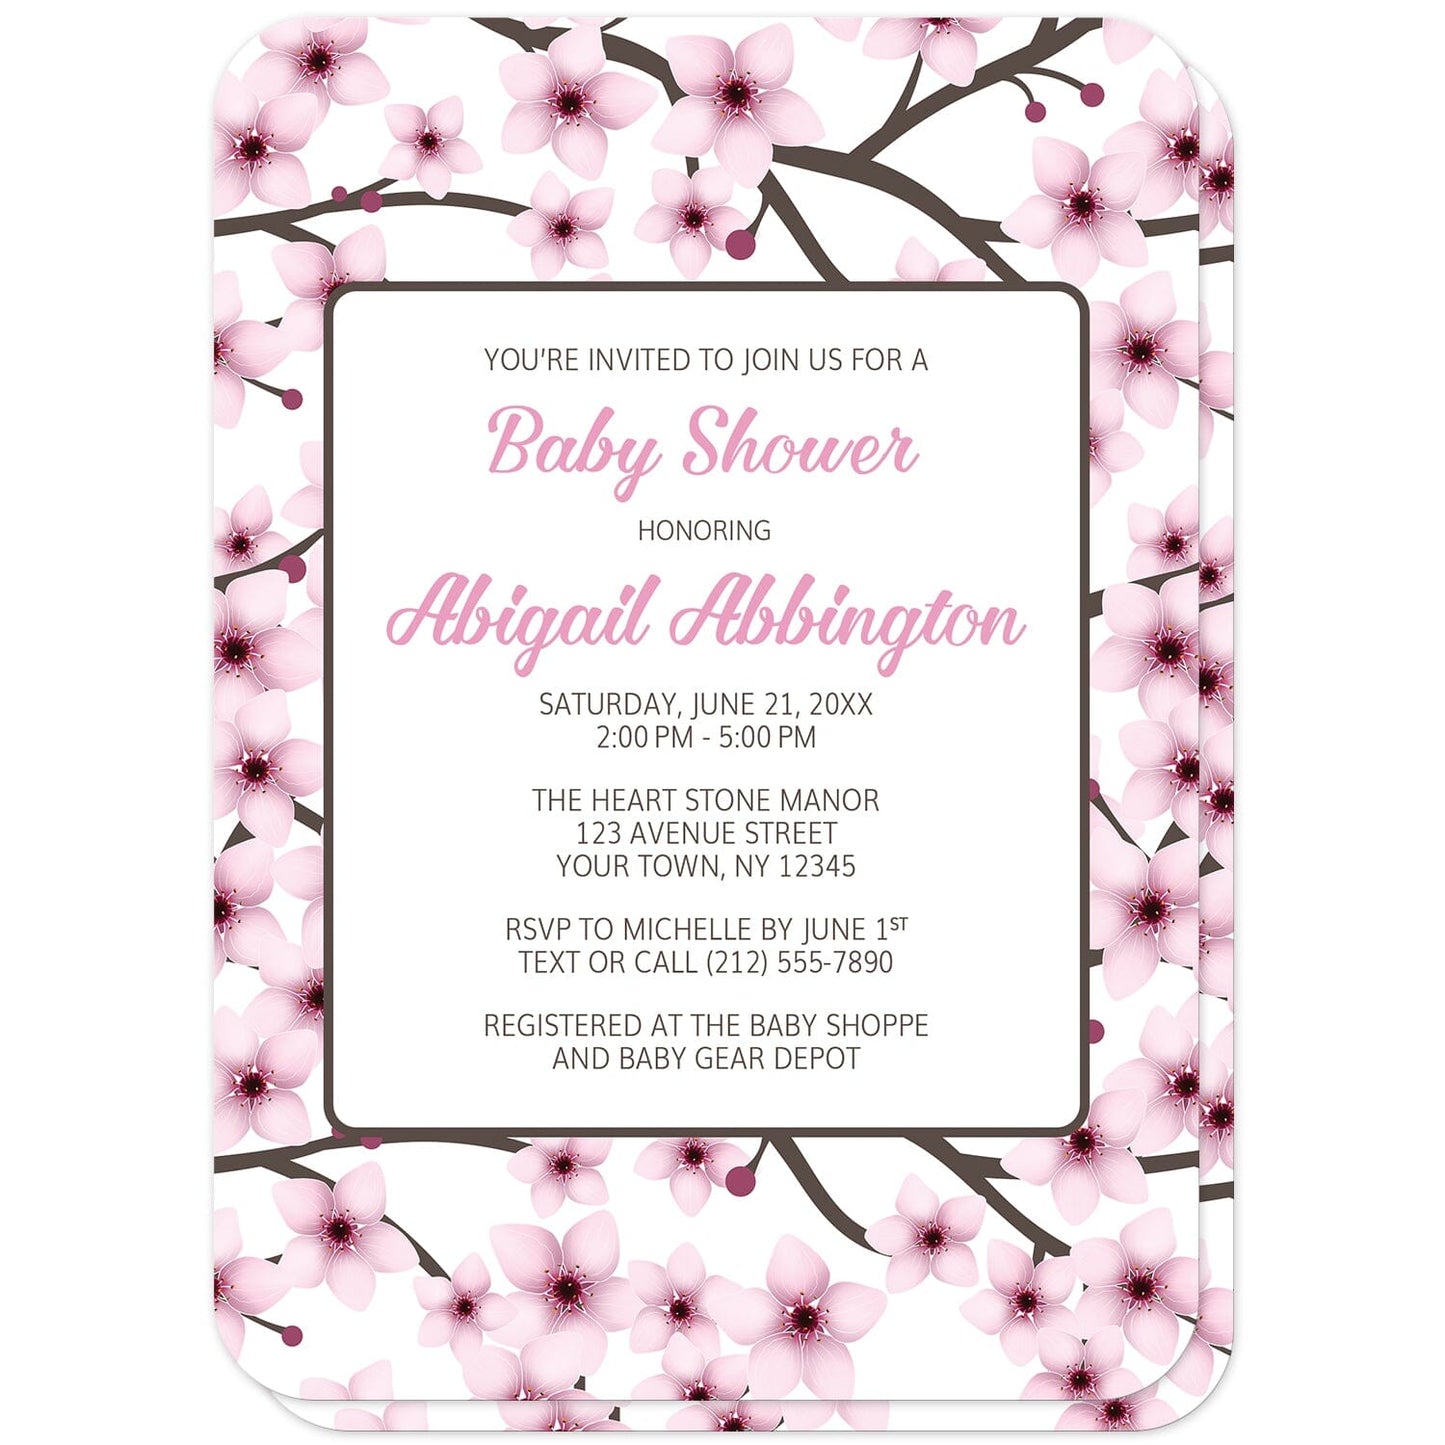 Cherry Blossom Baby Shower Invitations (front with rounded corners) at Artistically Invited. Cherry blossom baby shower invitations designed with a gorgeous pattern of pink cherry blossom branches. This beautiful floral background design is also printed on the back side of the invitations. Personalize these invitations with your baby shower celebration details in pink and dark brown in a white rectangular area over the pretty cherry blossoms. 